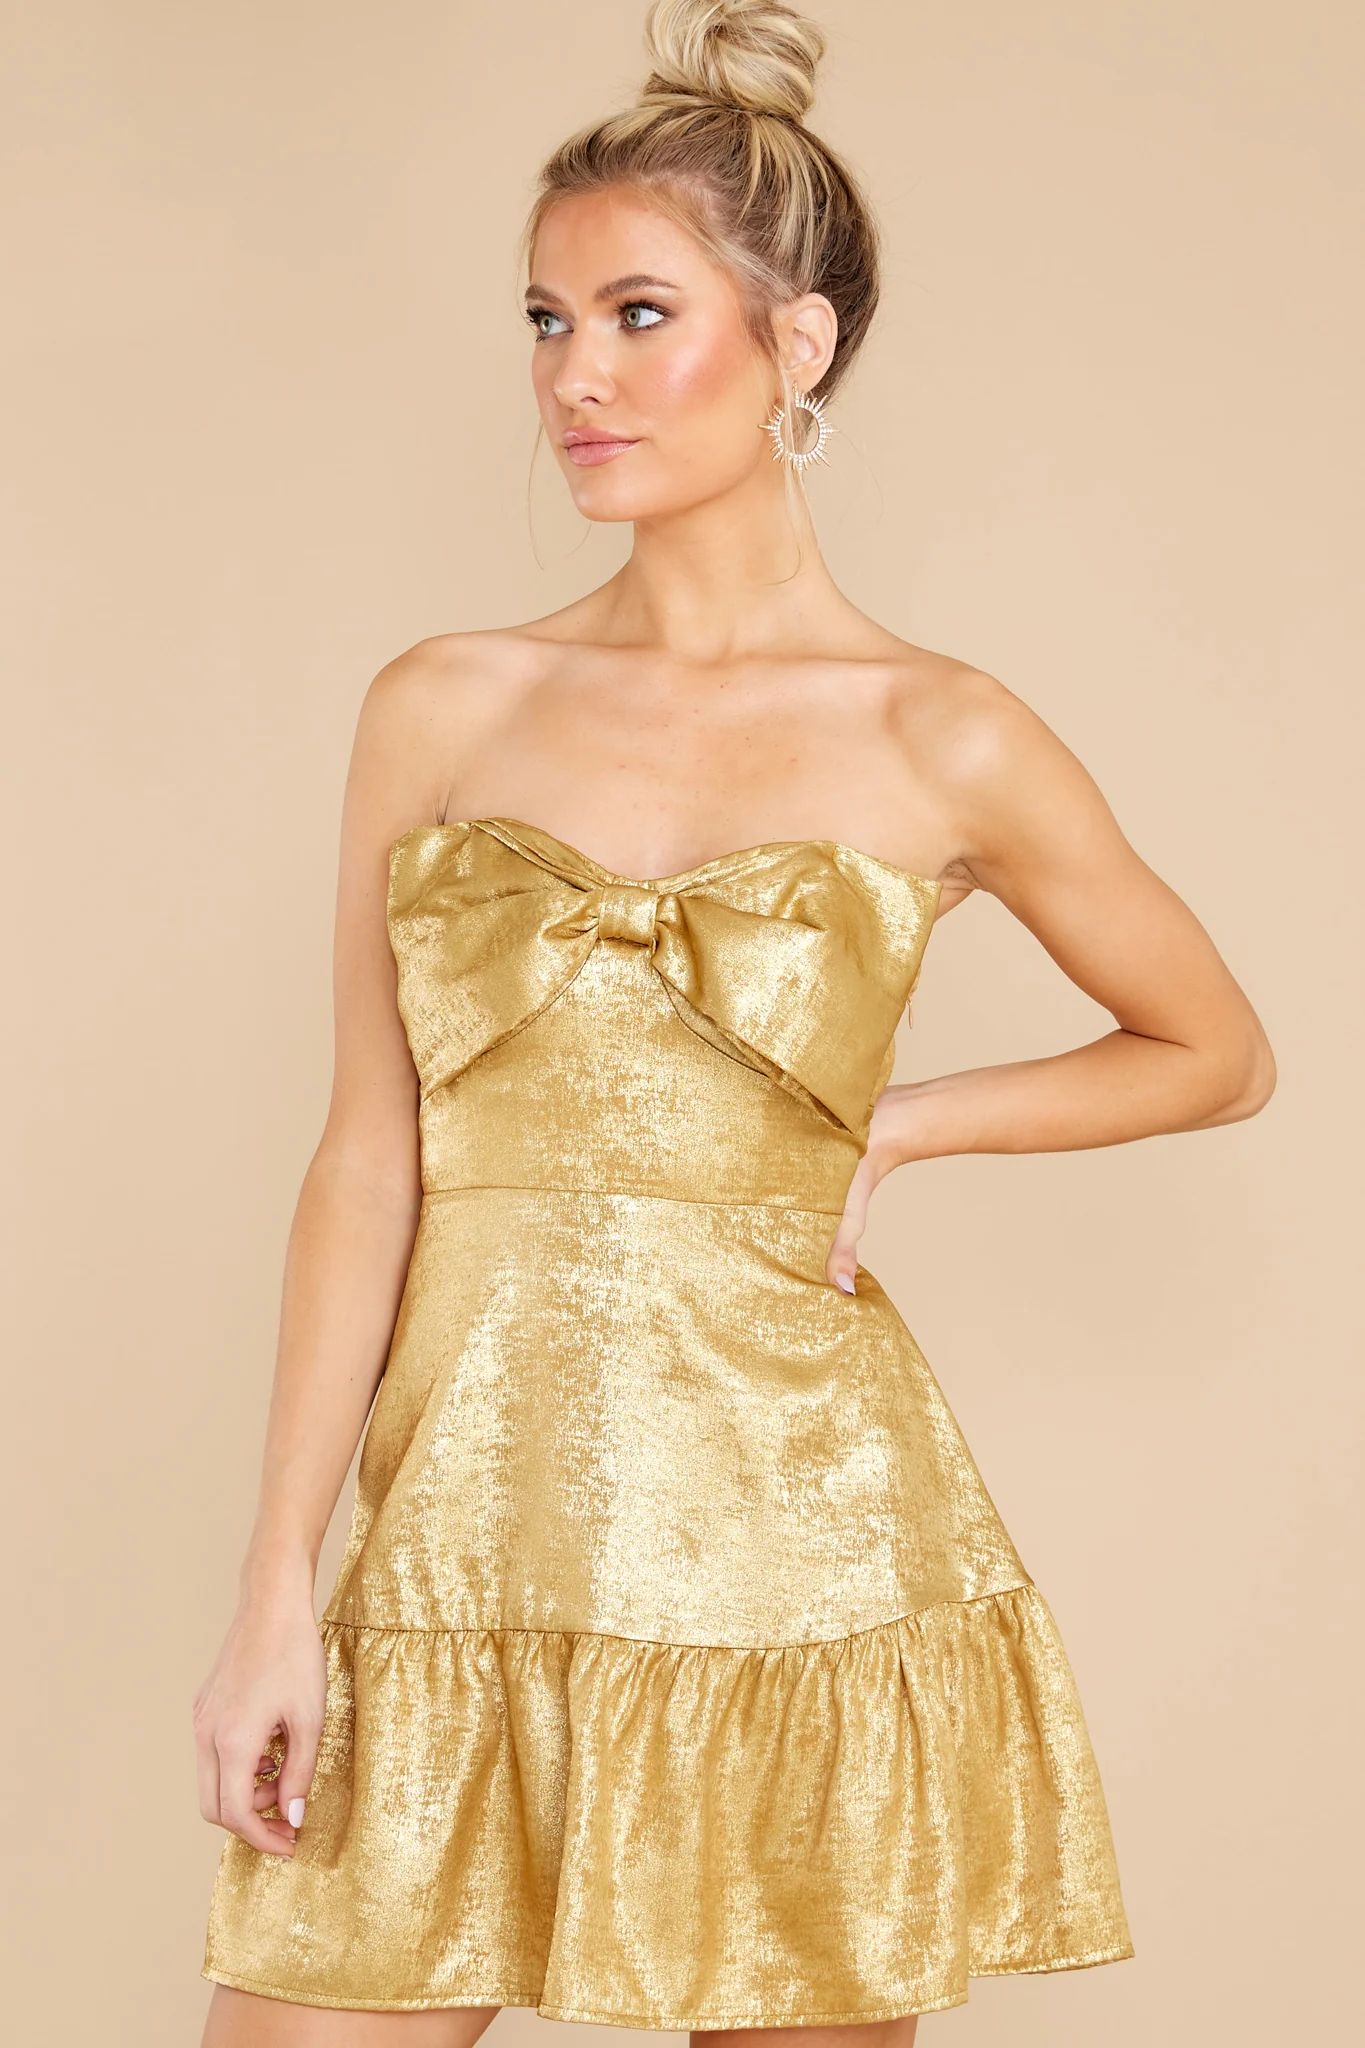 Fun And Festive Gold Dress | Red Dress 